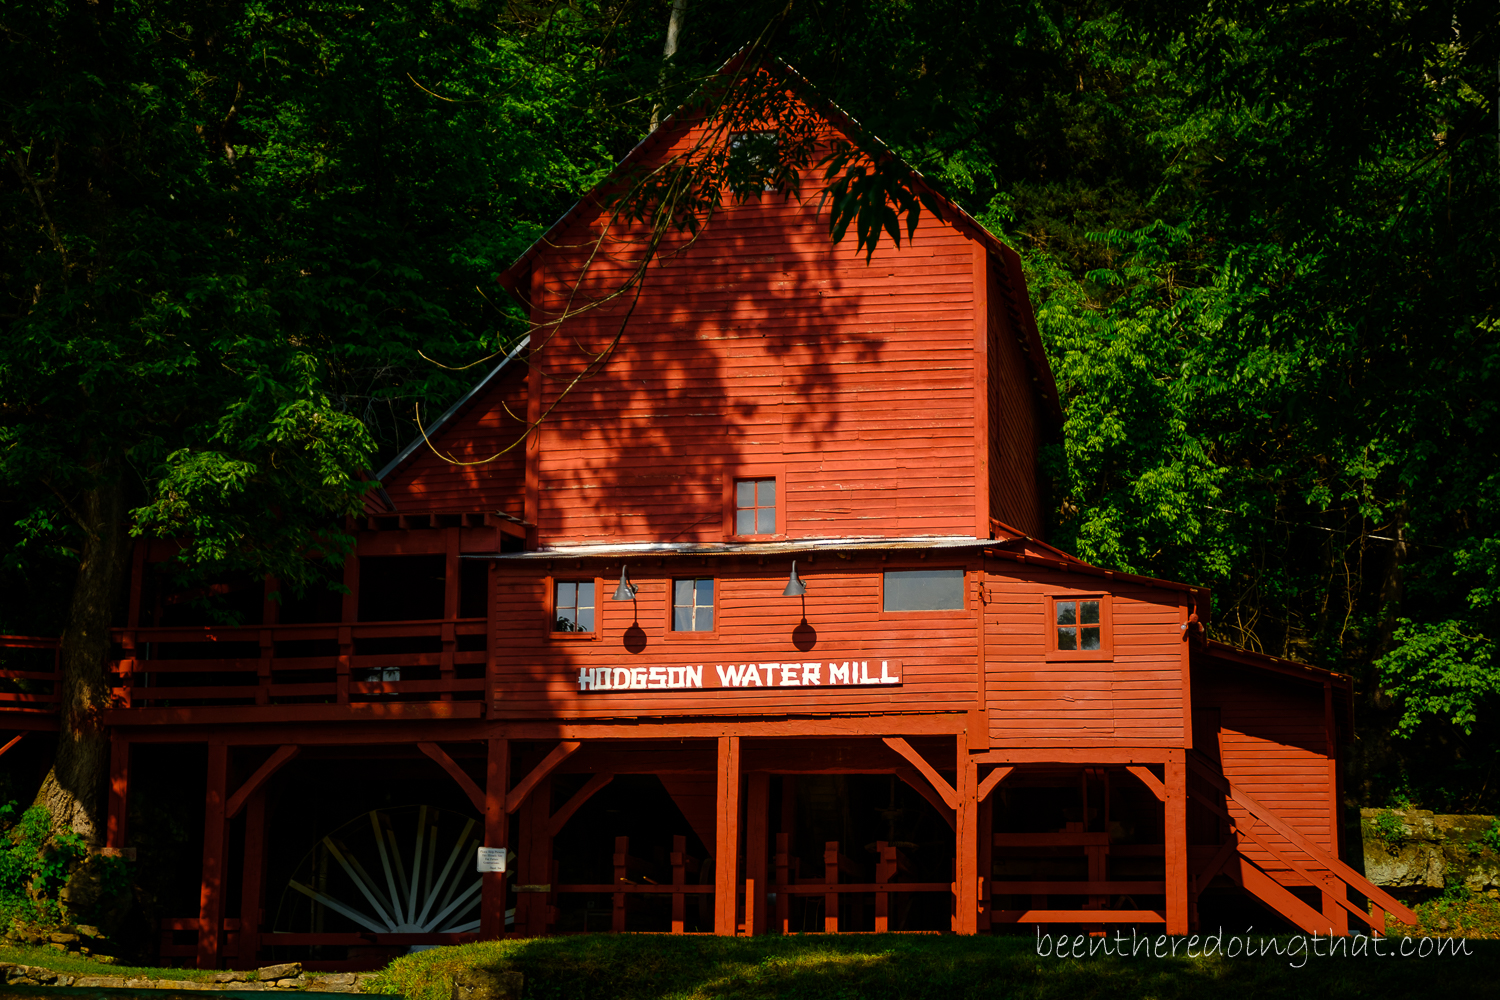 Hodgson Water Mill | Our Favorite Photos